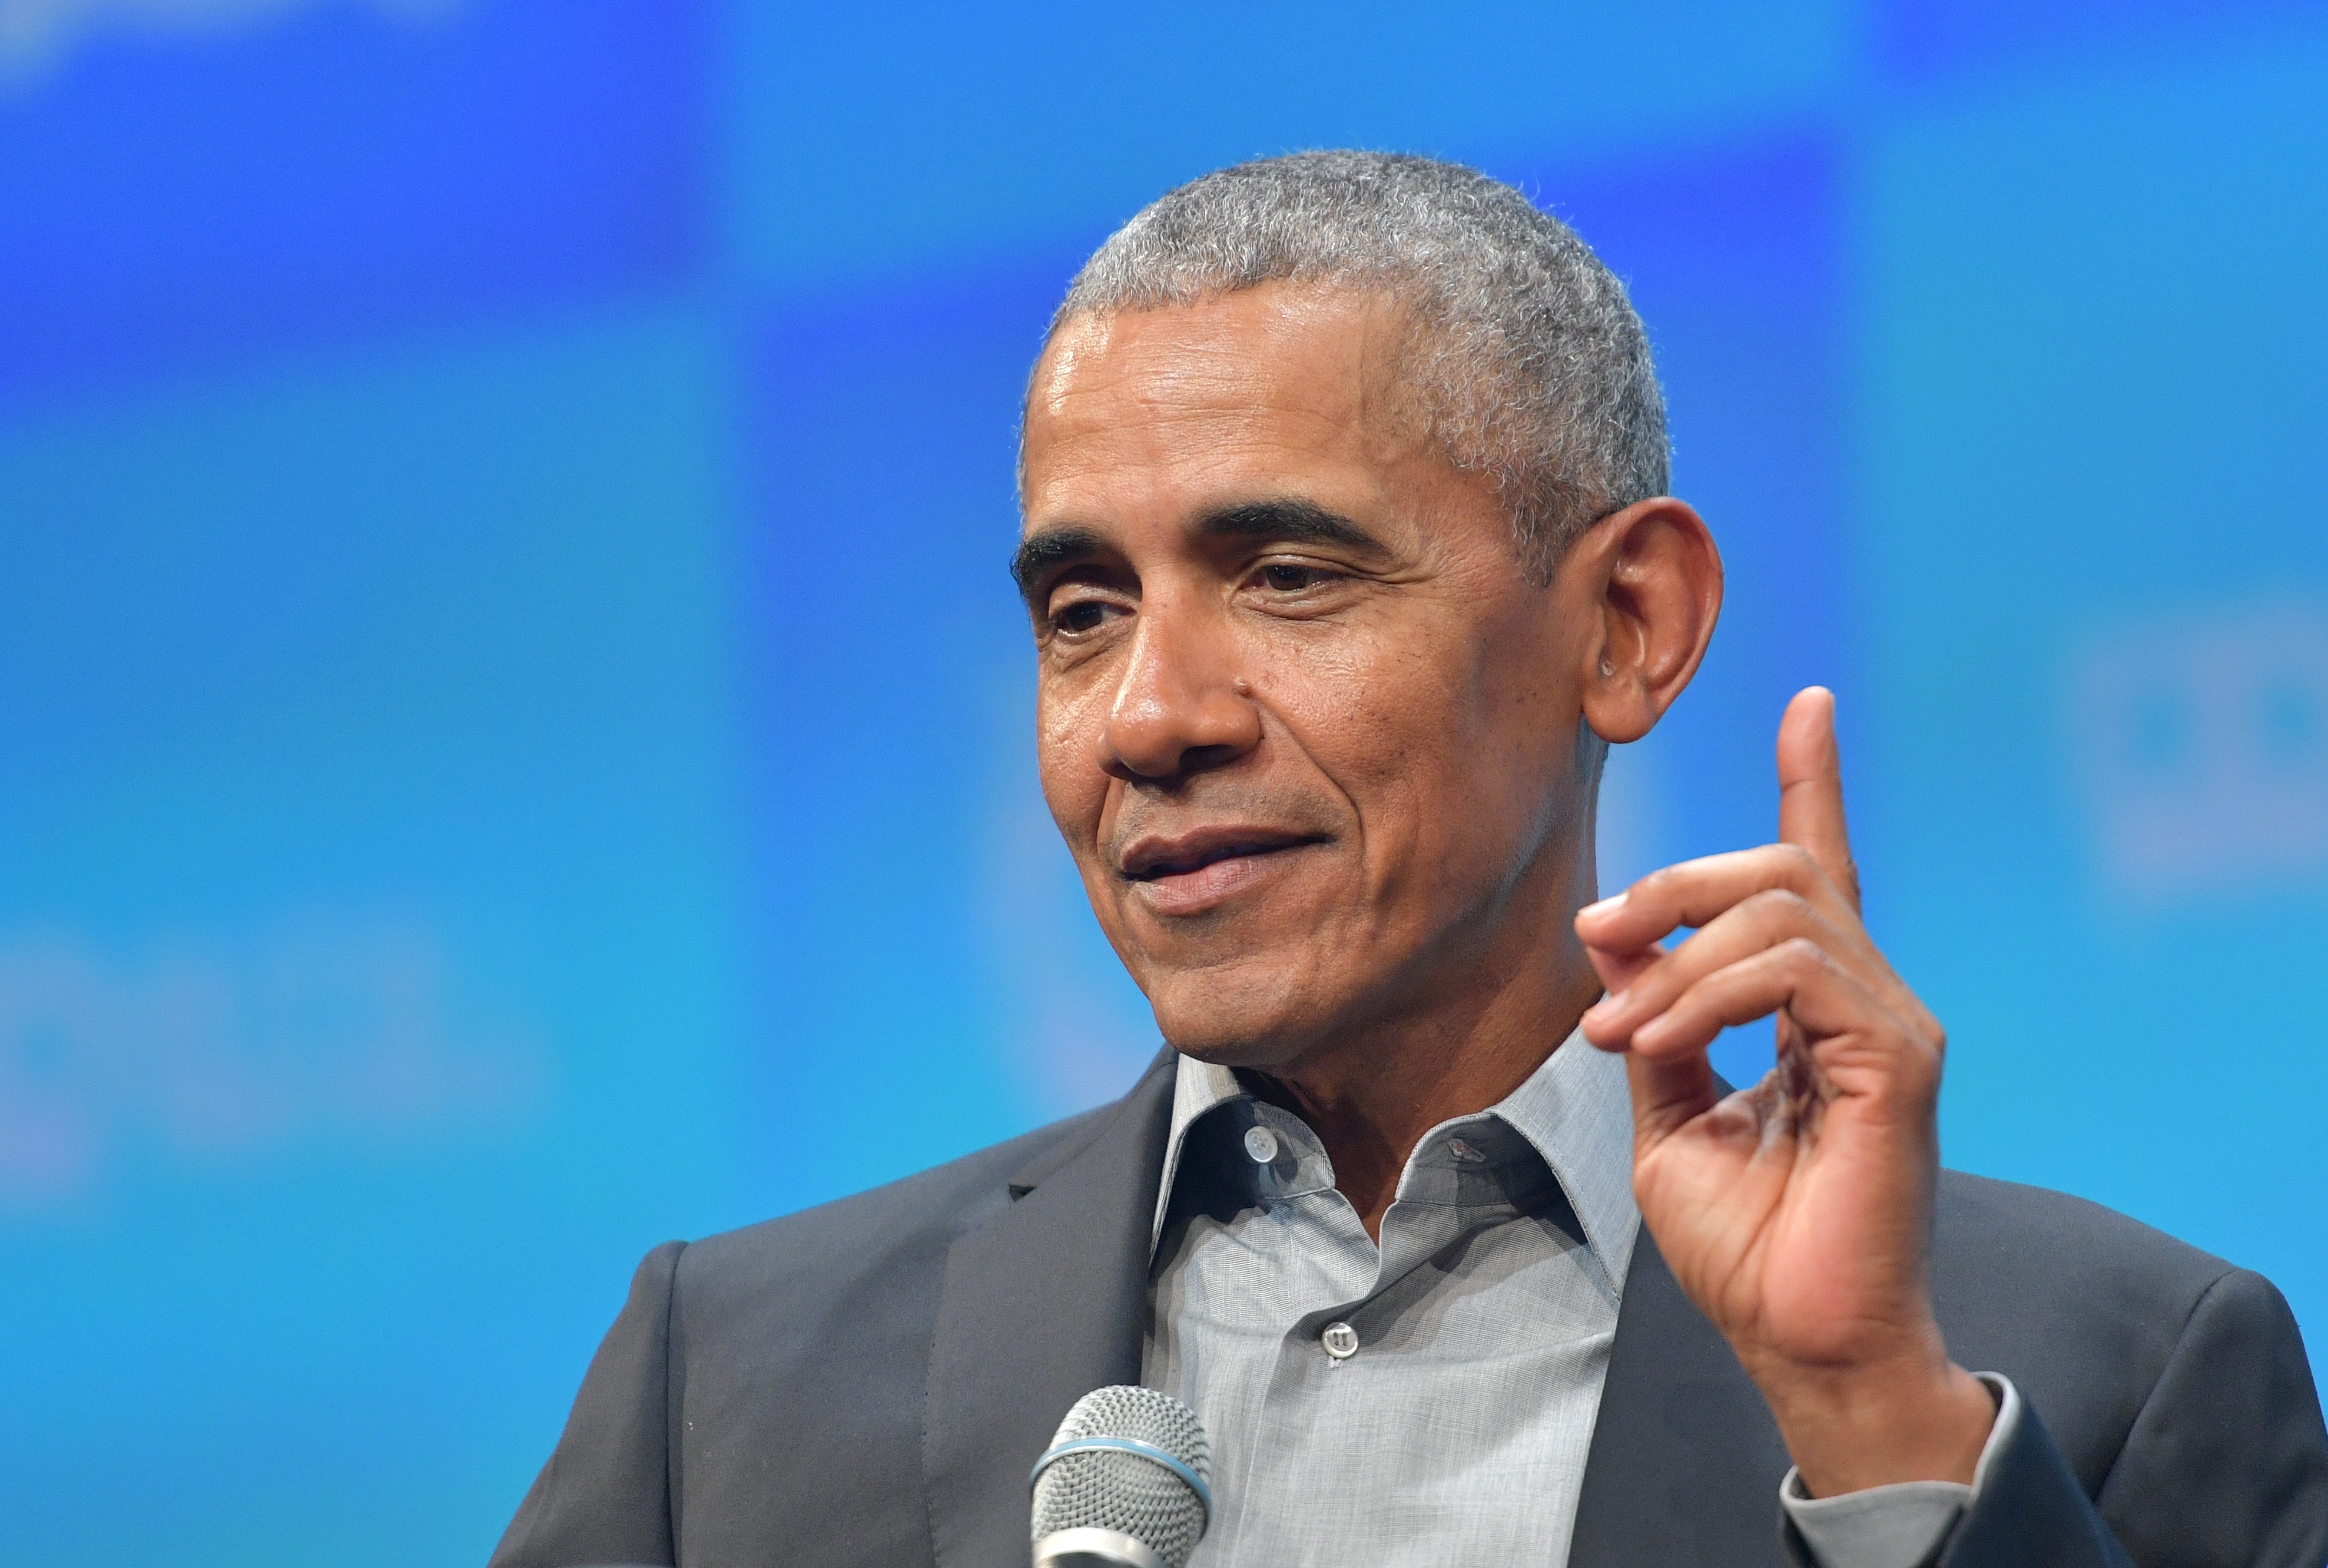 Barack Obama pictured speaking at the Bits & Pretzels meetup on September 29, 2019 in Munich, Germany. | Photo: Getty Images